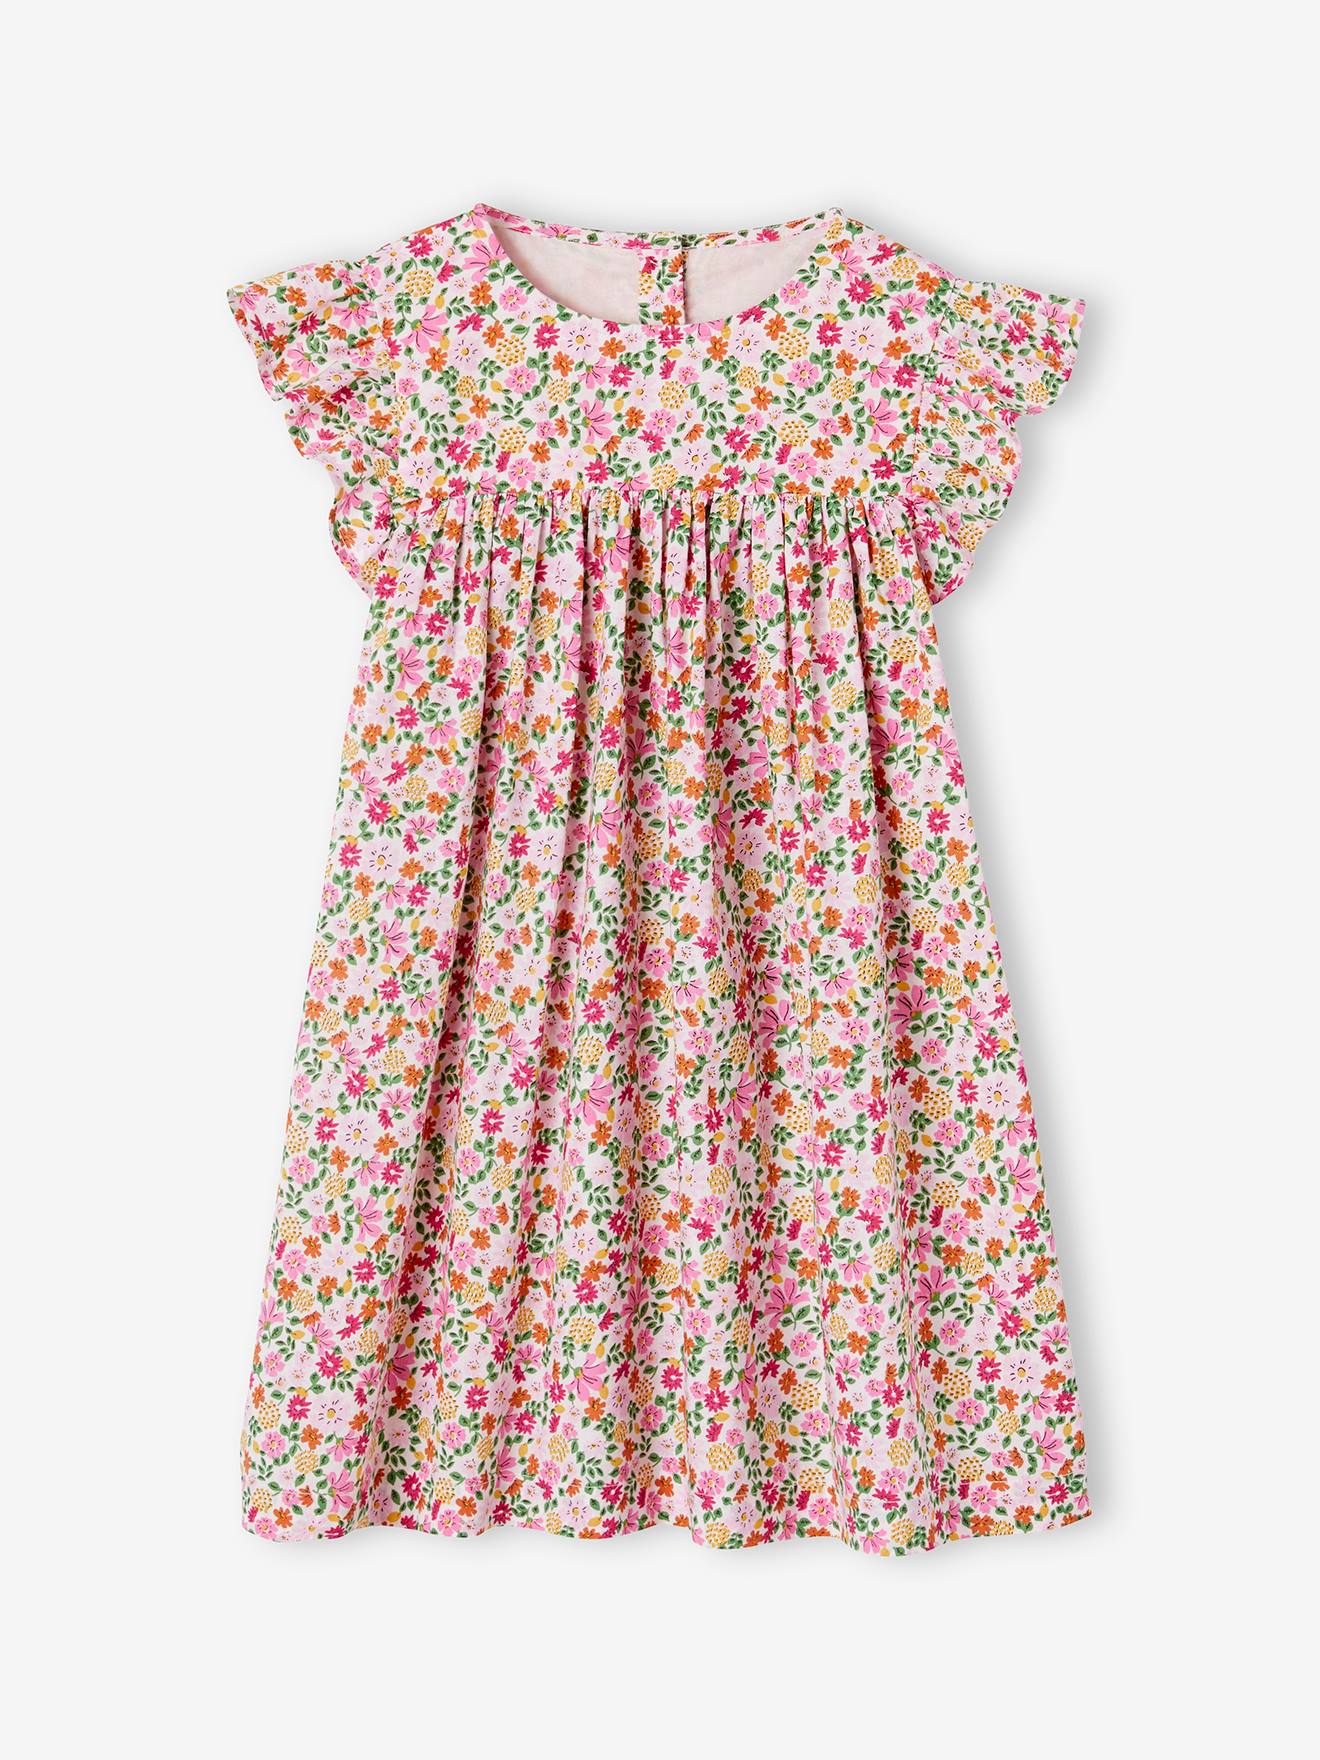 Ruffled, Short Sleeve Dress with Prints, for Girls pale pink